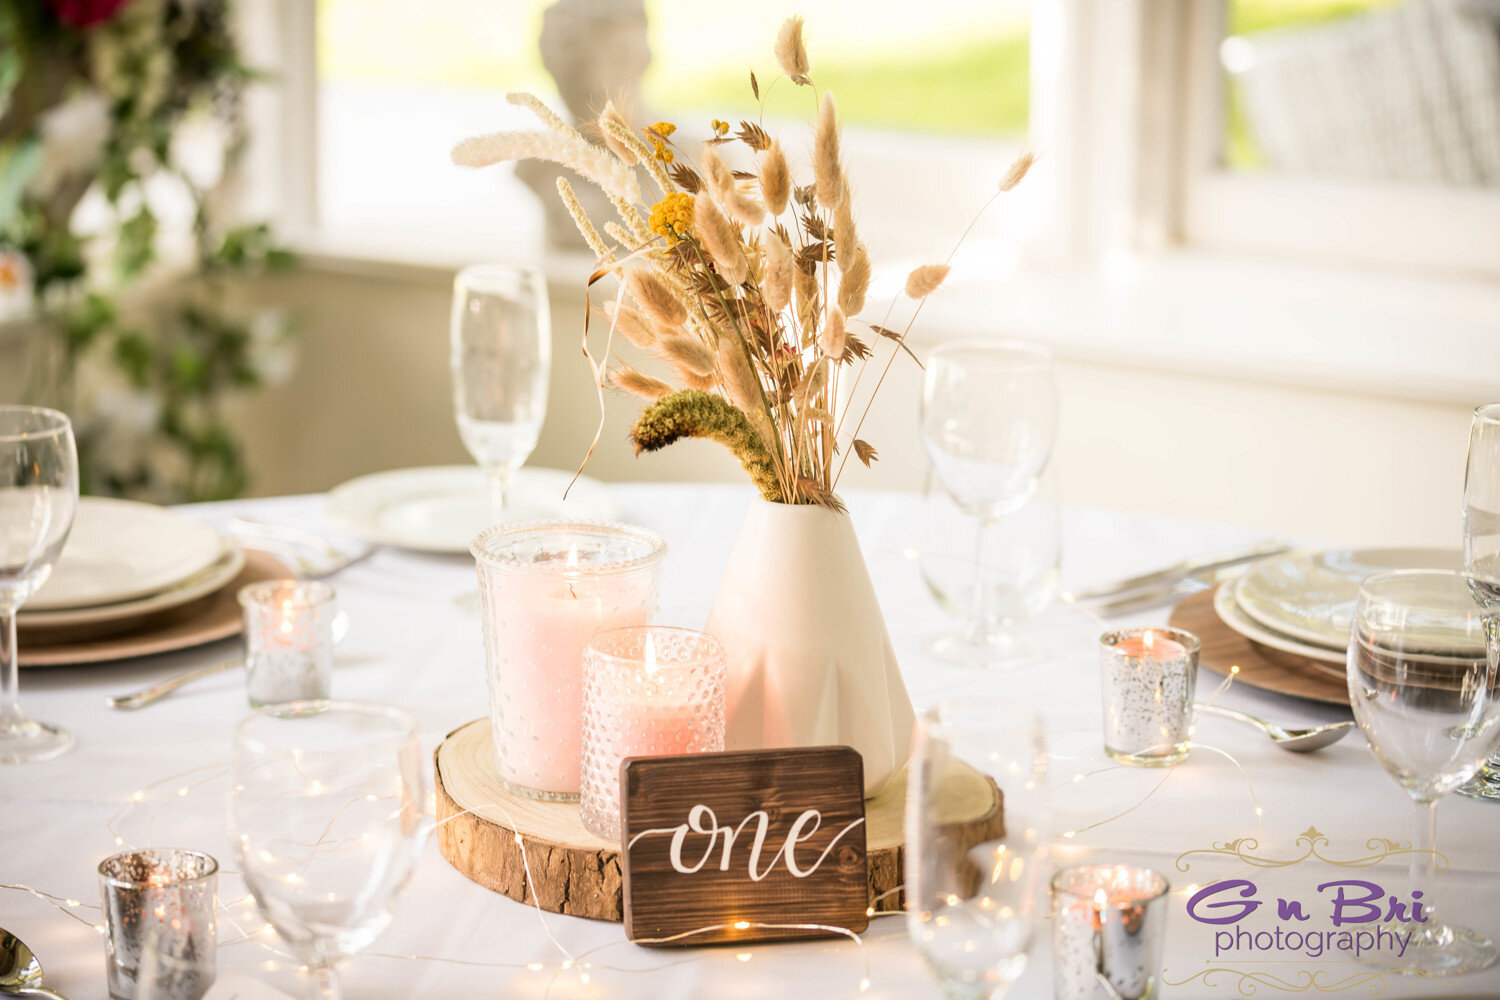 Scapescape_Wedding Inspiration_Table Centrepiece_Wild Flowers_Rustic_GnBri Photography